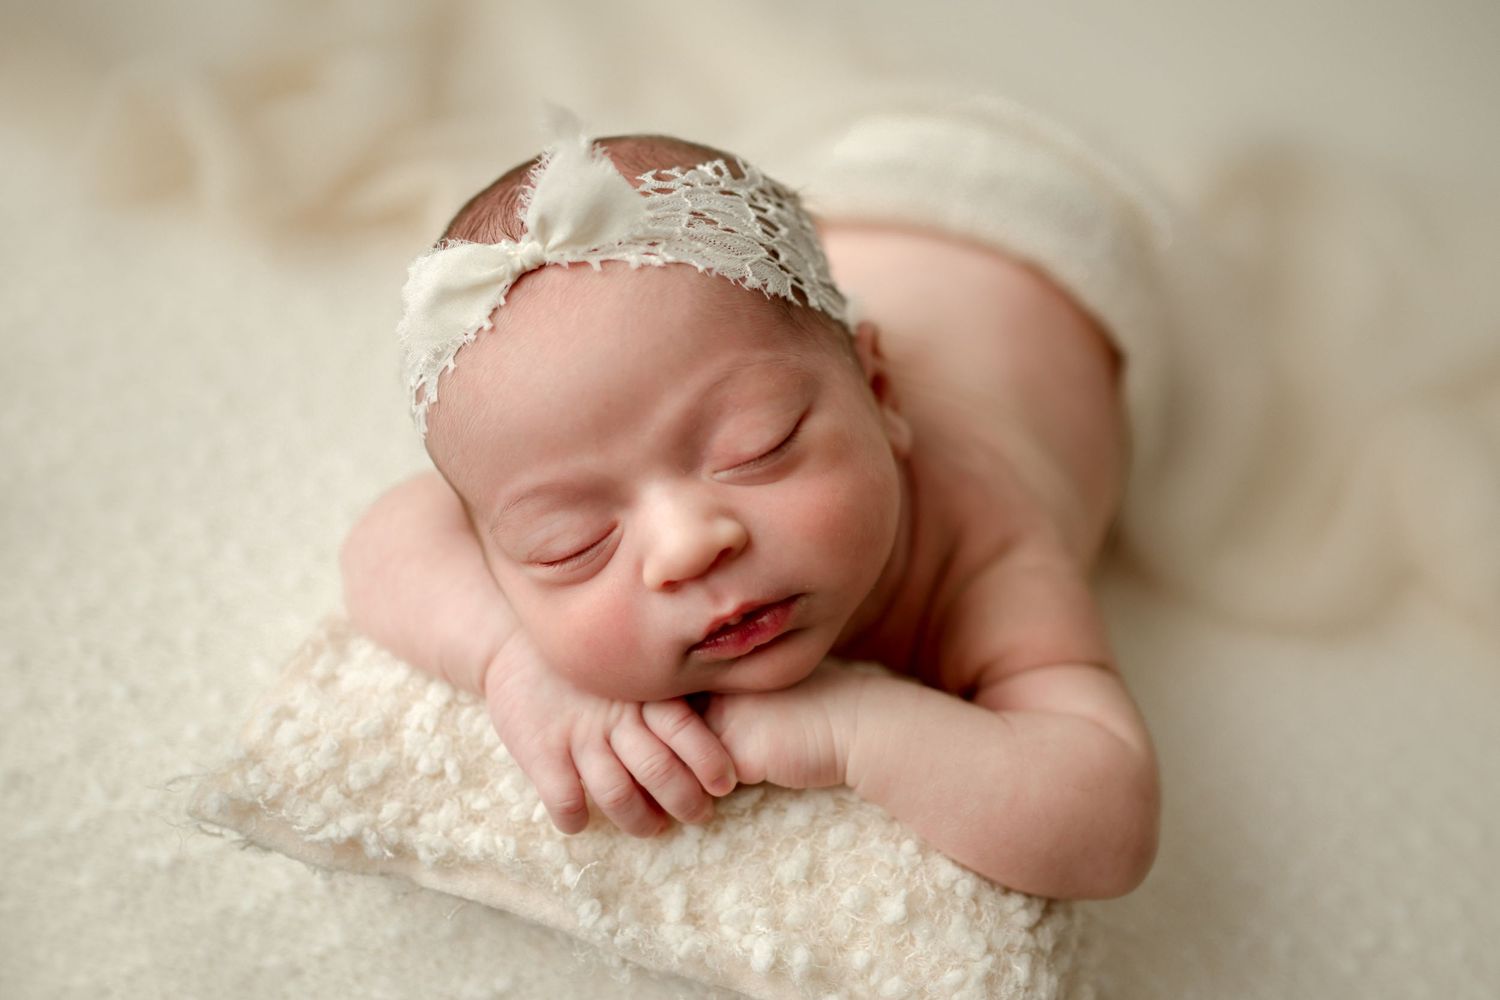 Newborn posed on creamy neutral setup during her Newborn Photography Session in Howard County